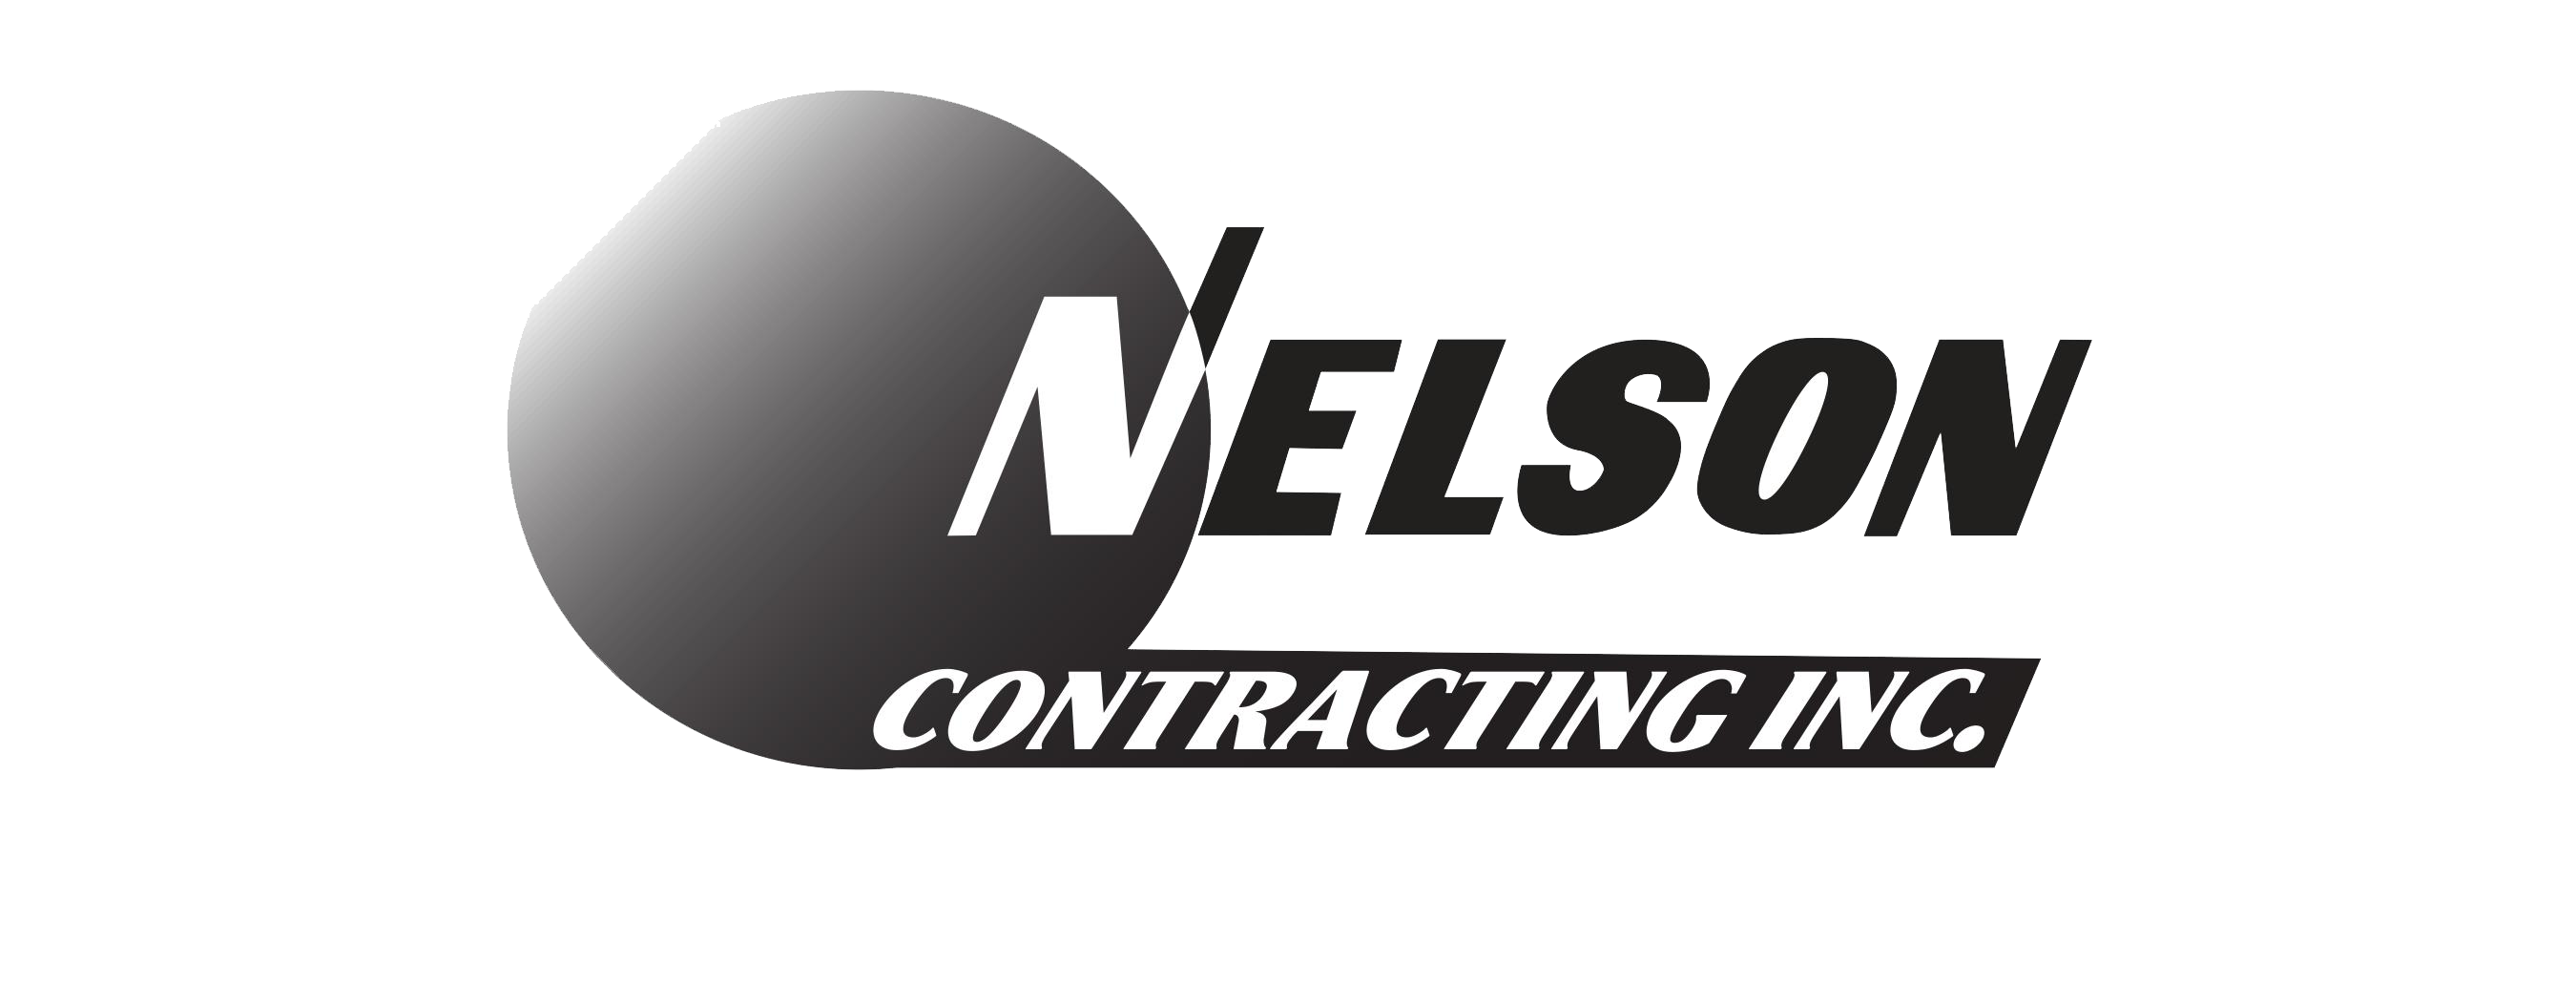 Nelson Contracting Inc